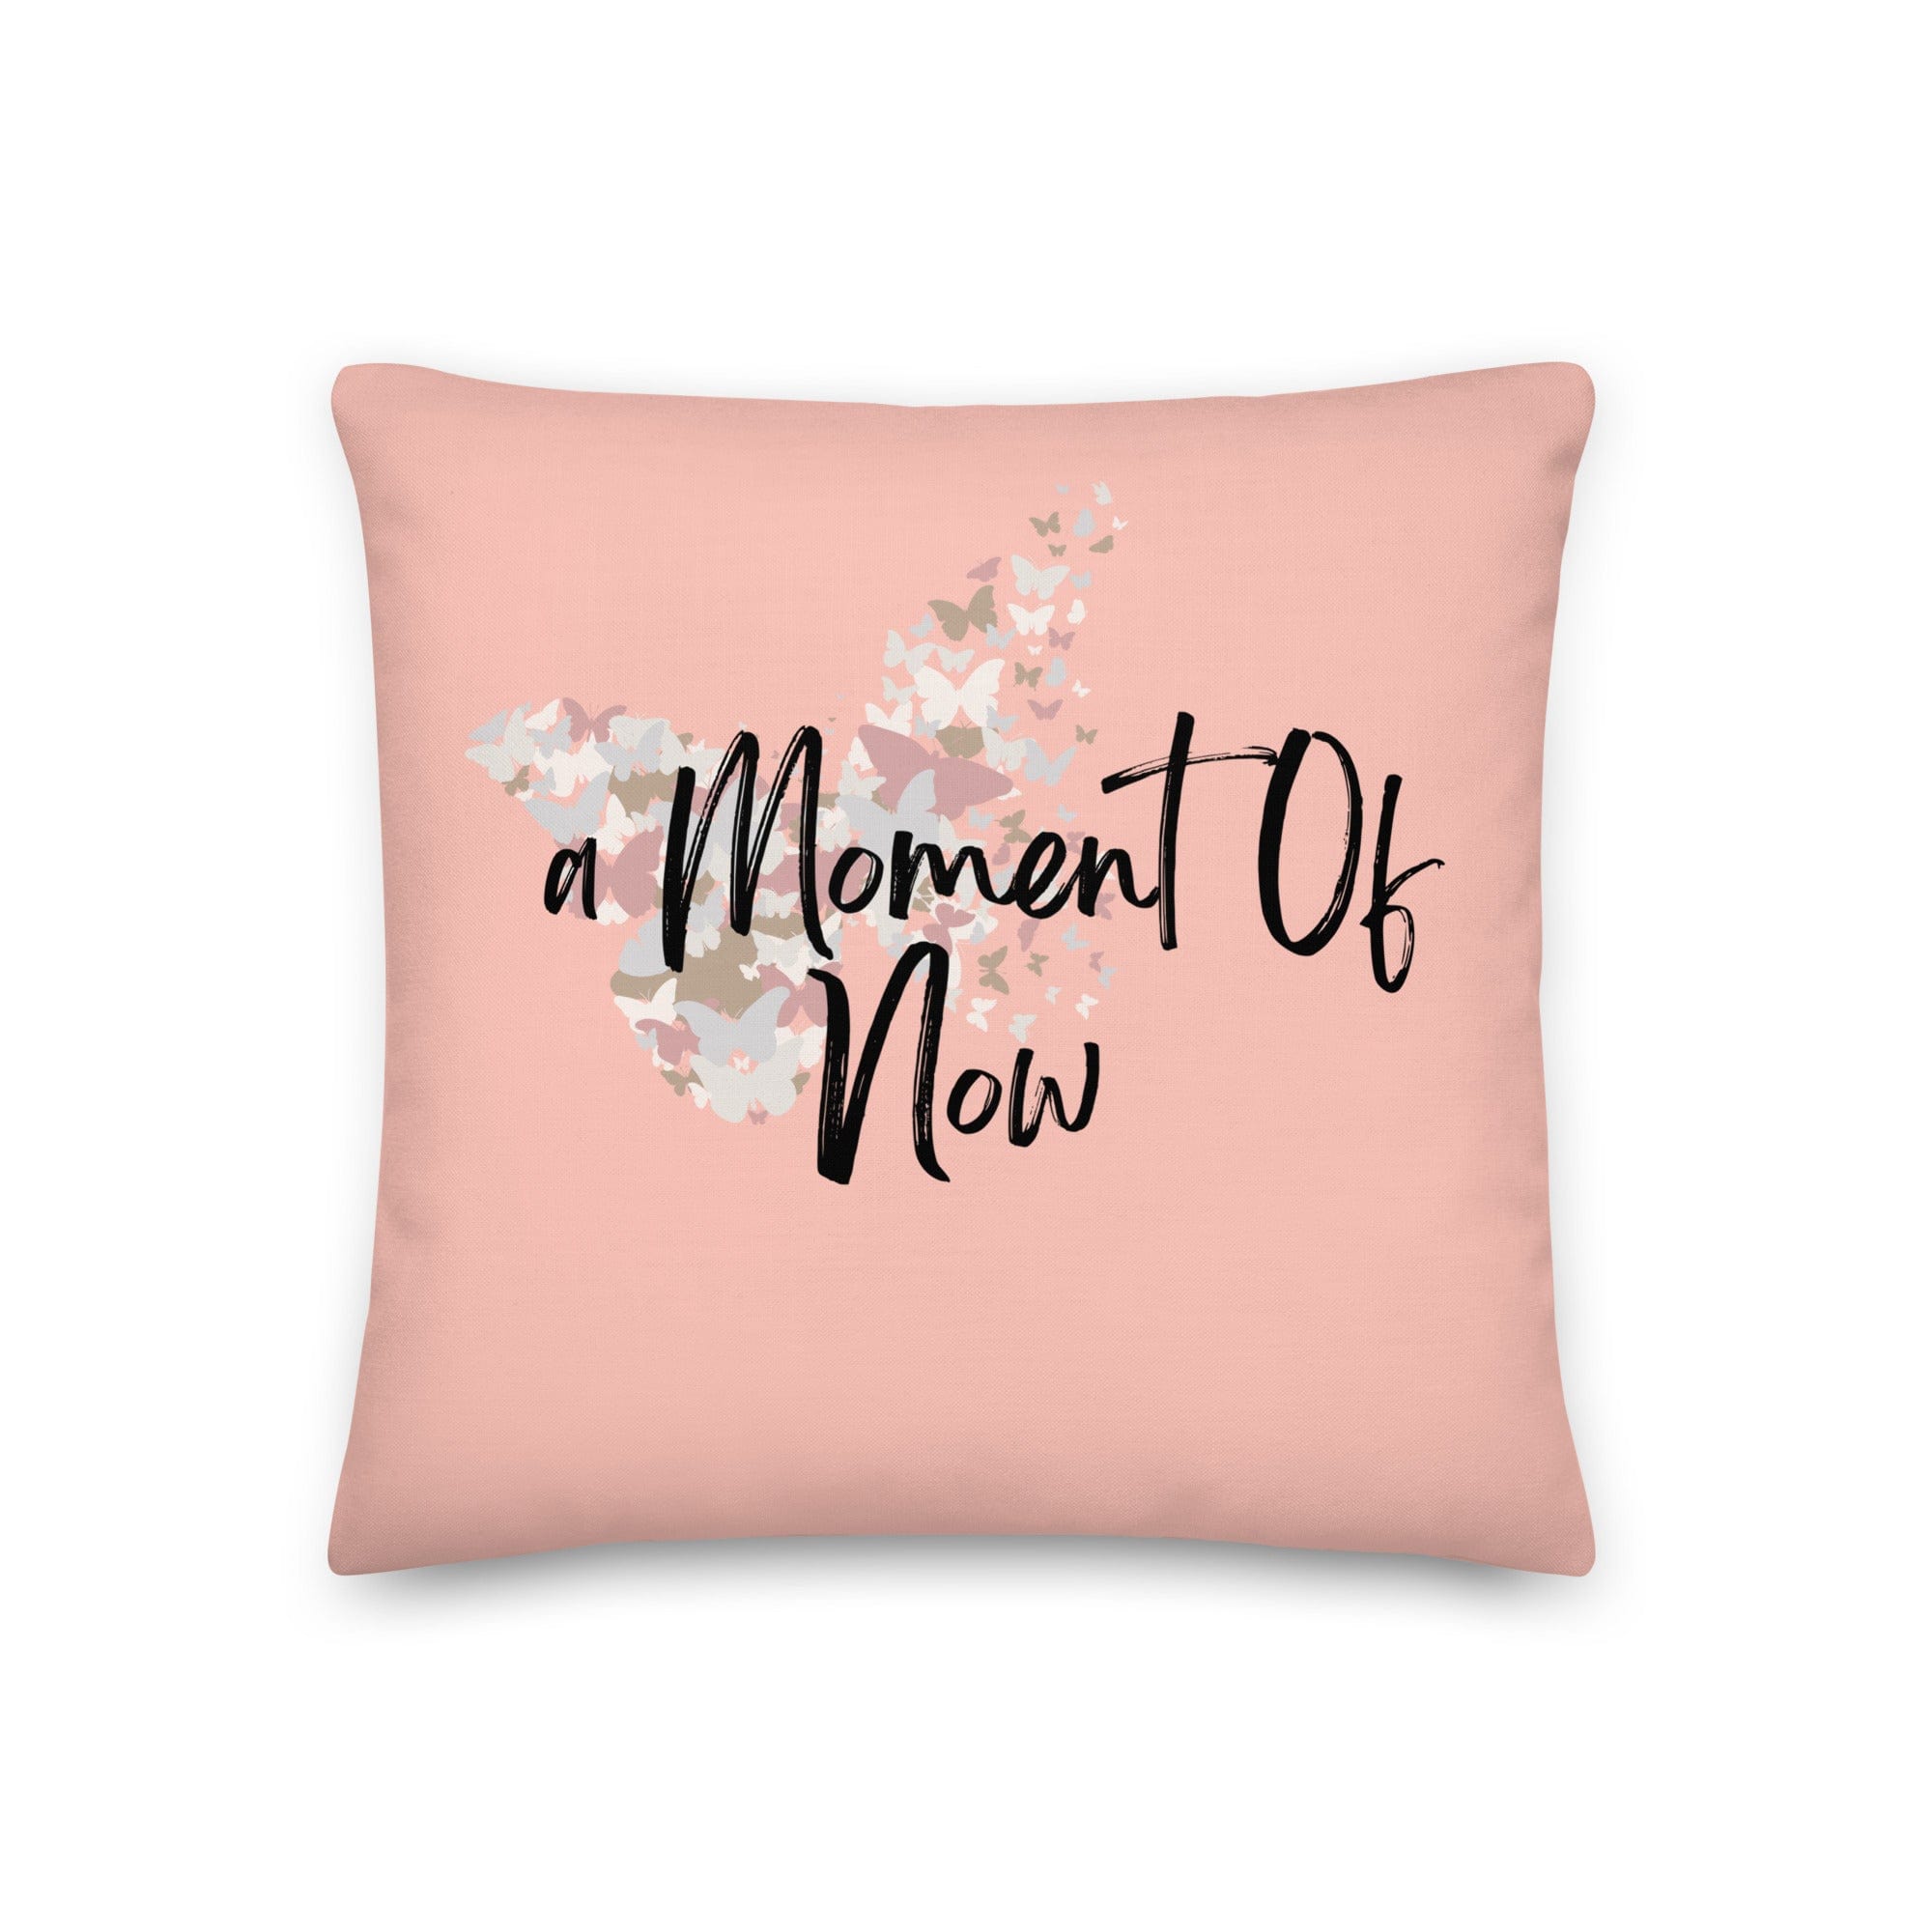 Shop A Moment Of Now Mindfulness Premium Decorative Throw Pillow in Pink Throw Pillows Boutique Clothing Online